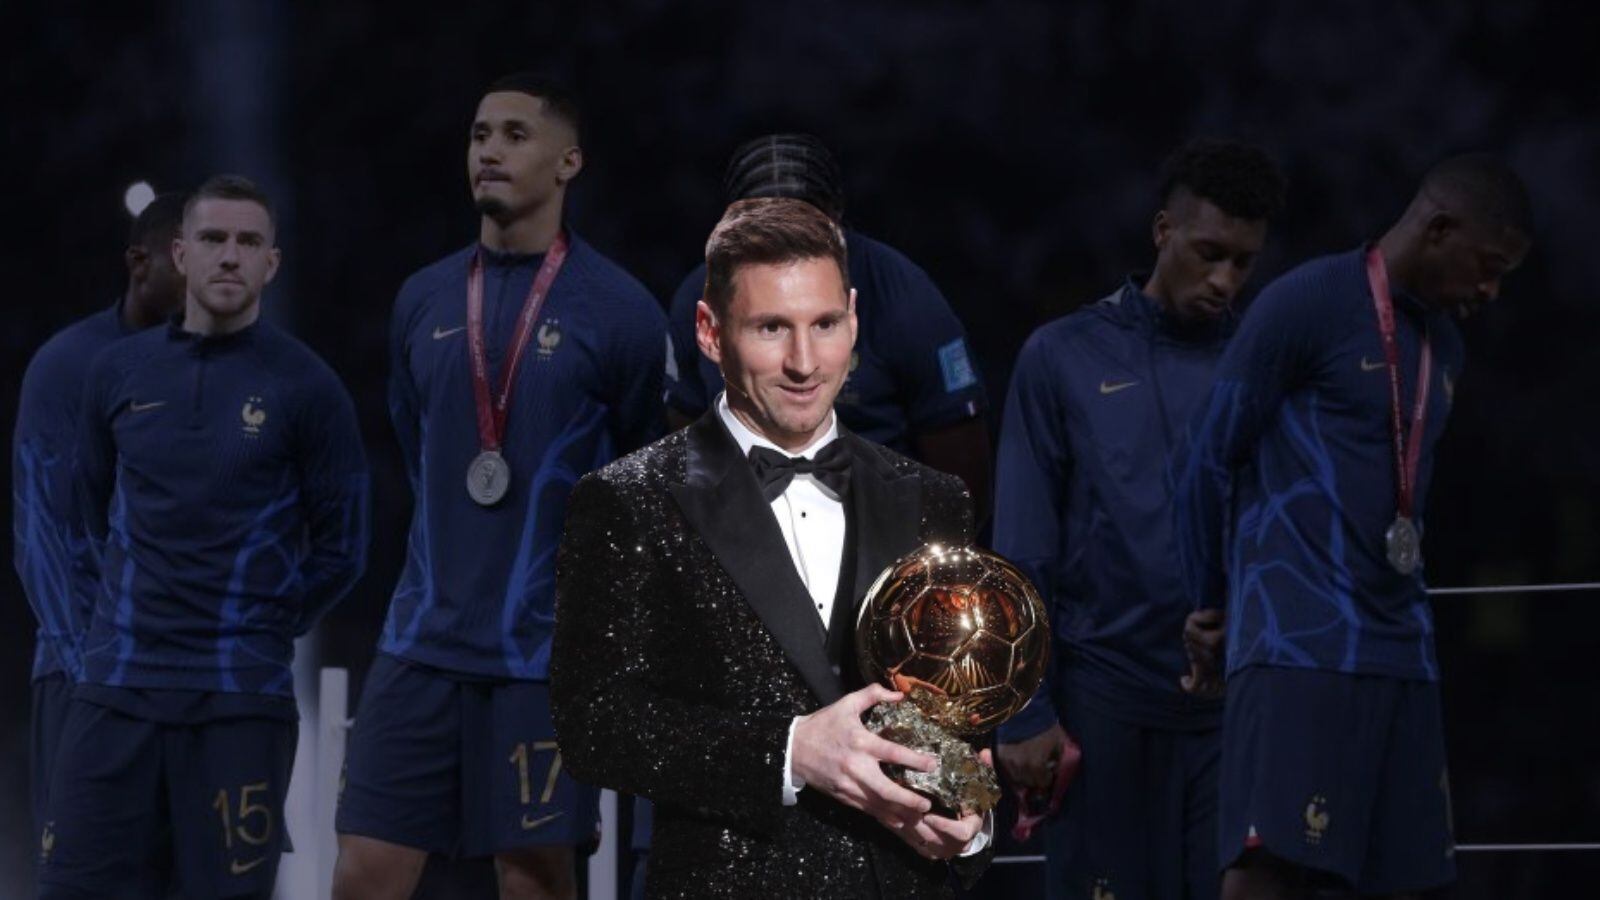 Still hurt, lost the final against Messi and now says he won't win the Ballon d'Or